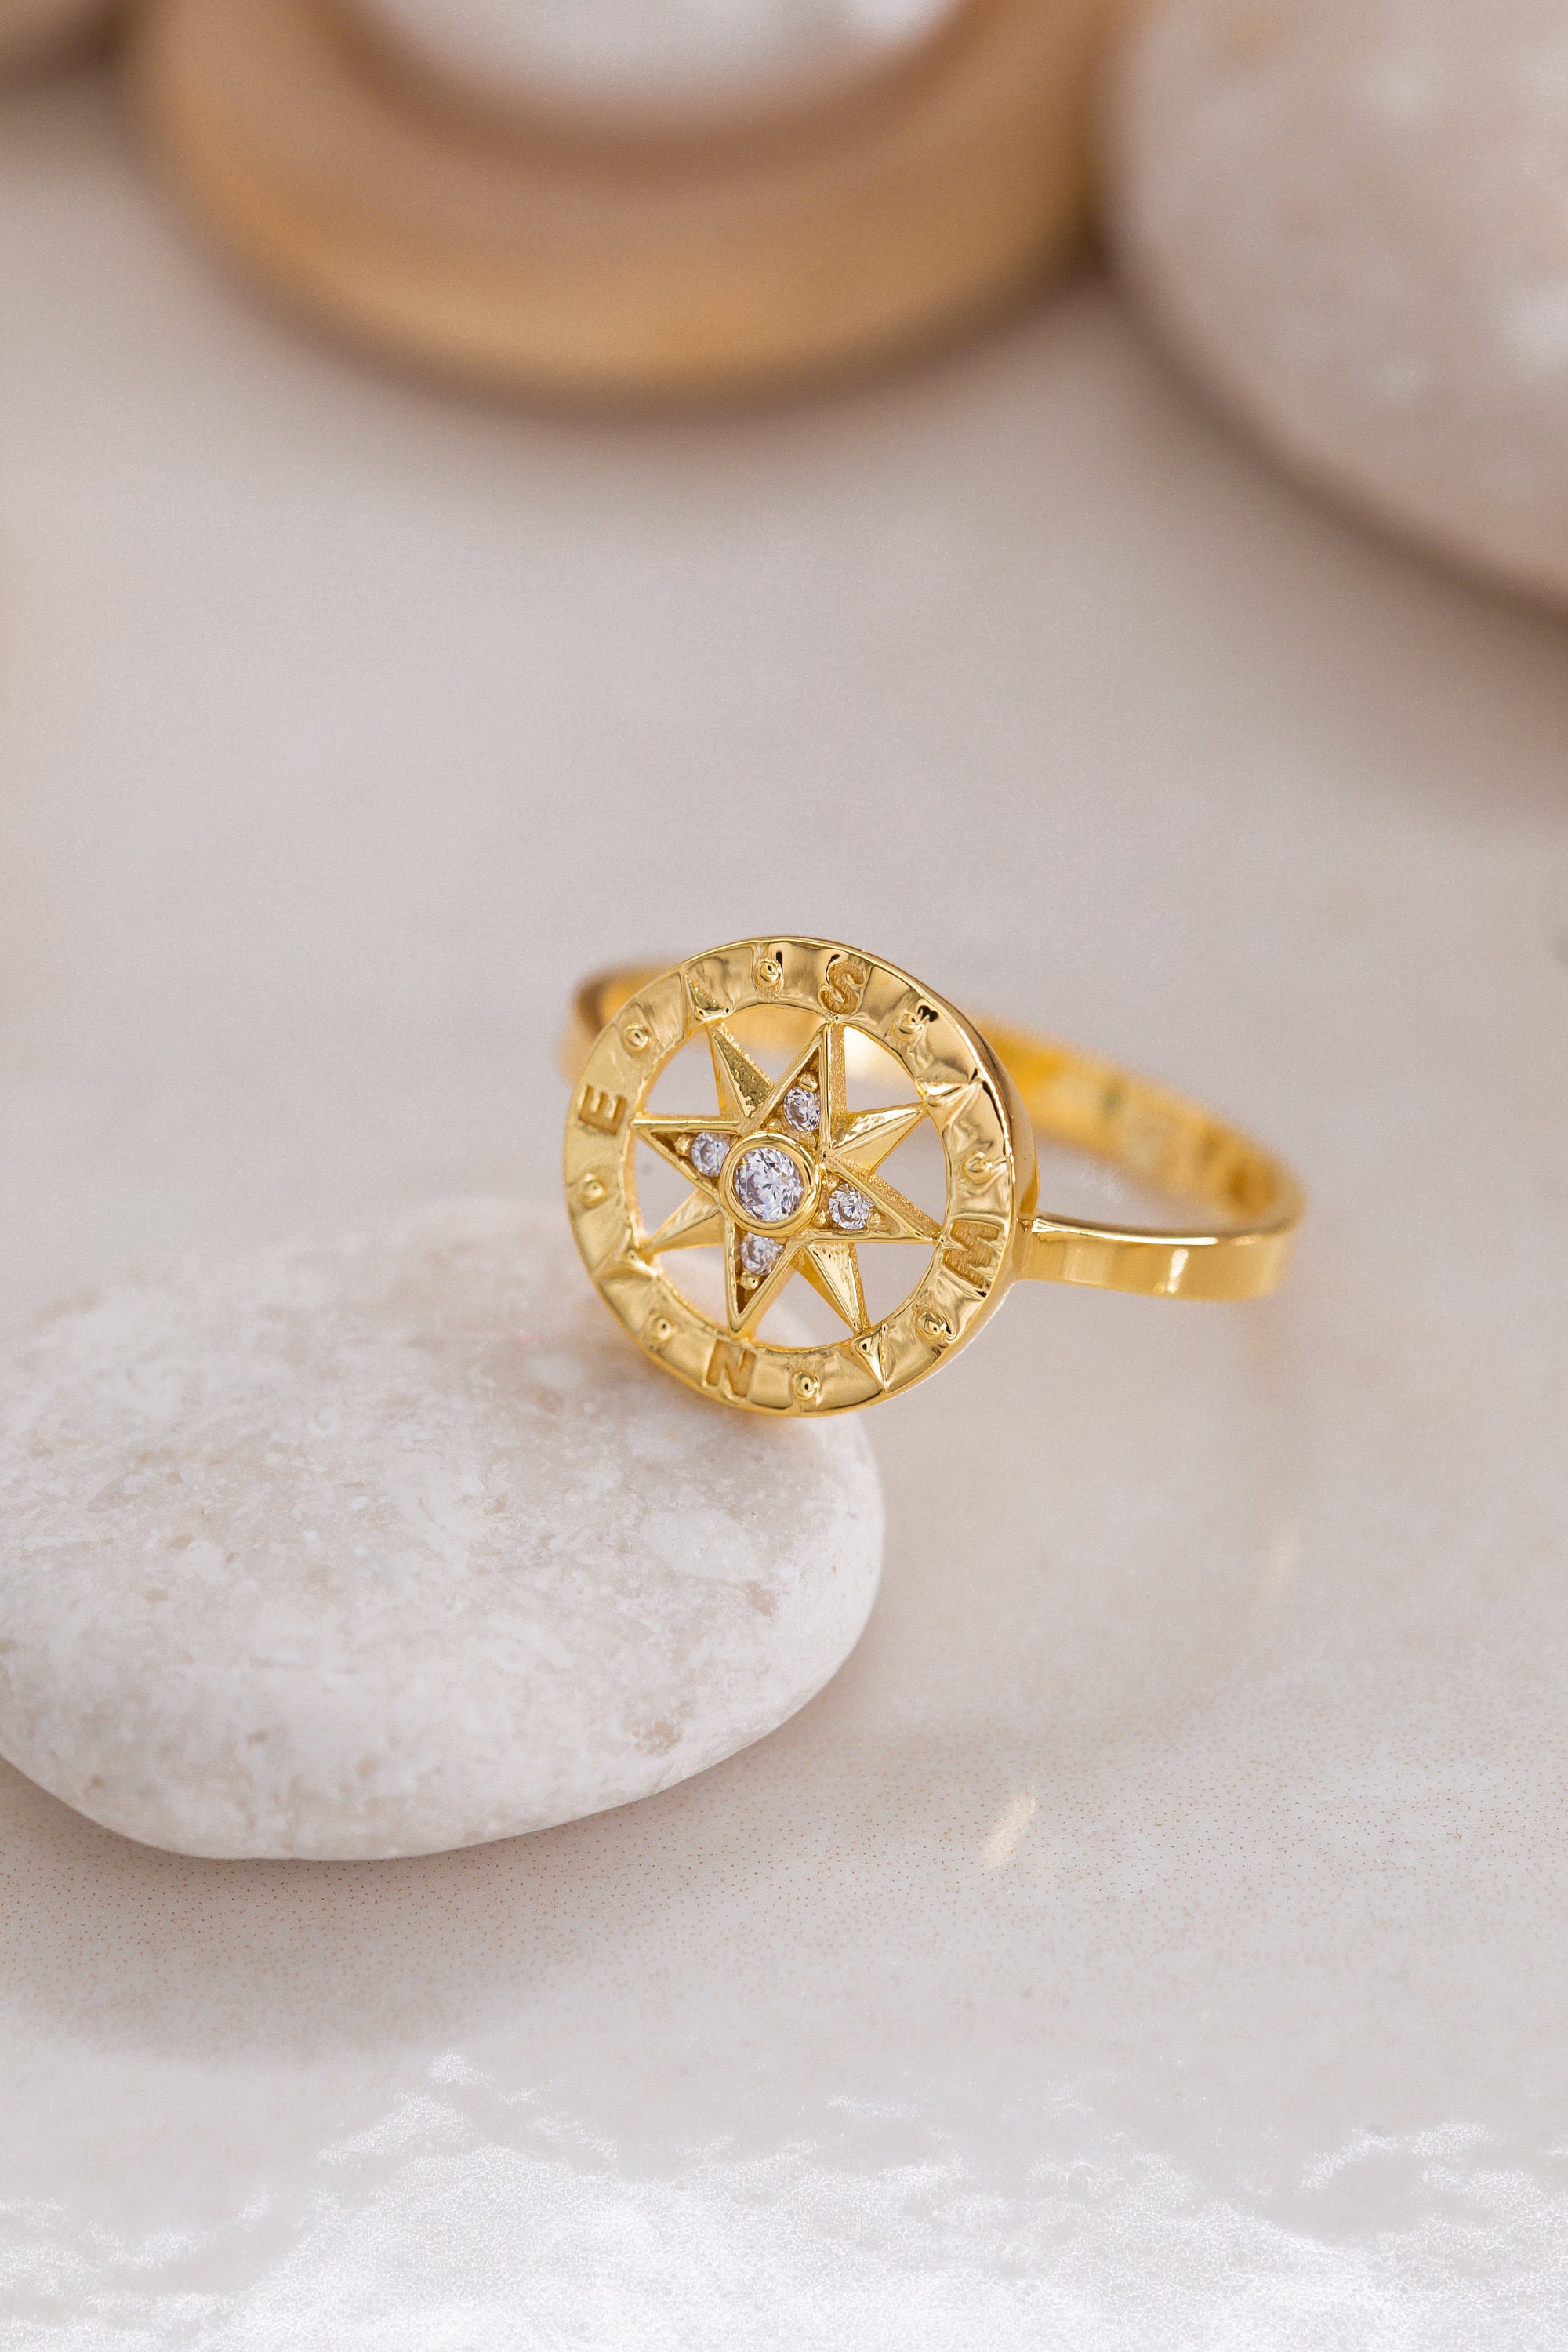 14K Golden North Star Ring / Golden North Star Design Ring/Star Ring For Her/North Star Gift/North Star Minimalist Ring/Gift For Mother Day